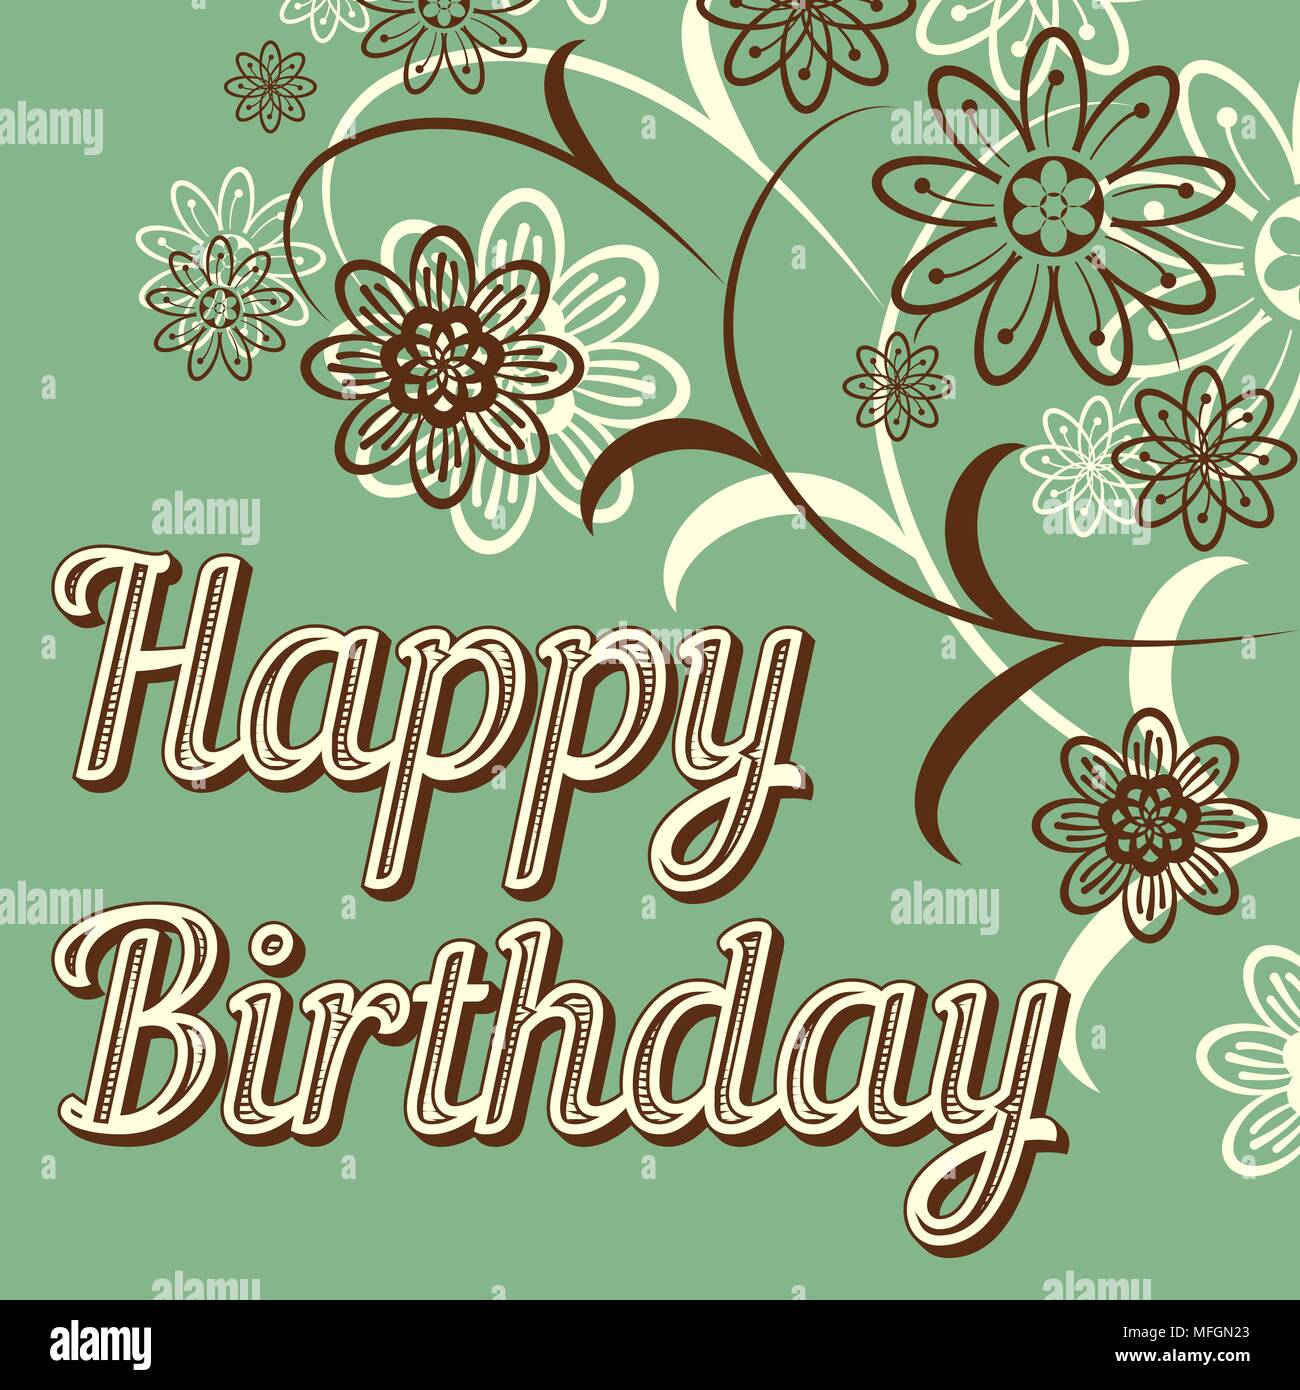 Vintage retro happy birthday card, with fonts, grunge frame and chevrons. Beautiful flowers. Vector illustration Stock Vector